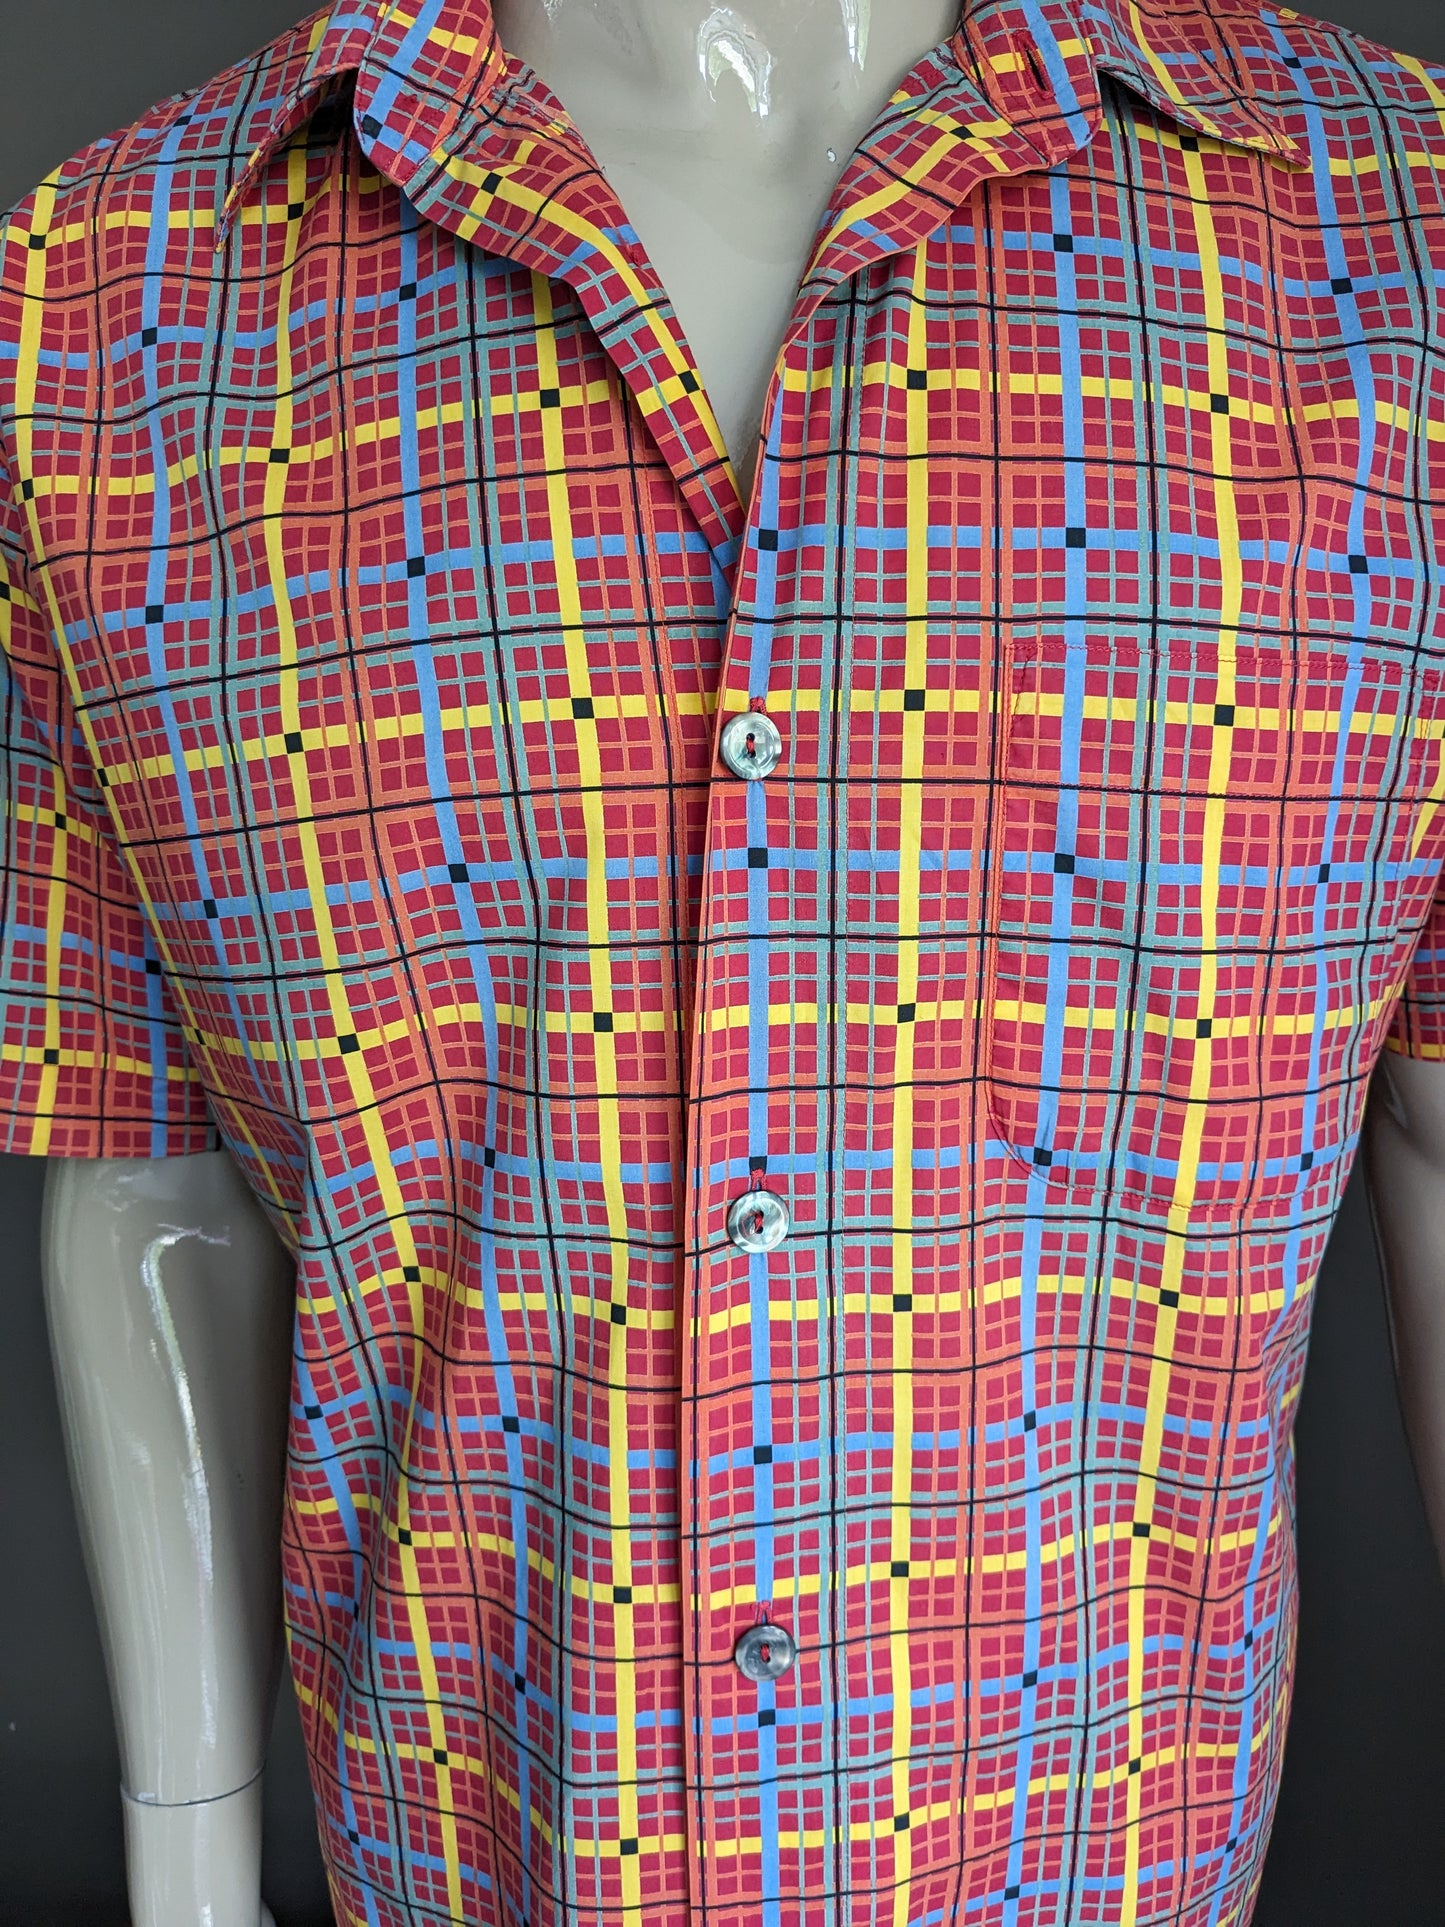 Vintage signum shirt short sleeve, larger buttons. Orange red blue yellow checked. Size XL.